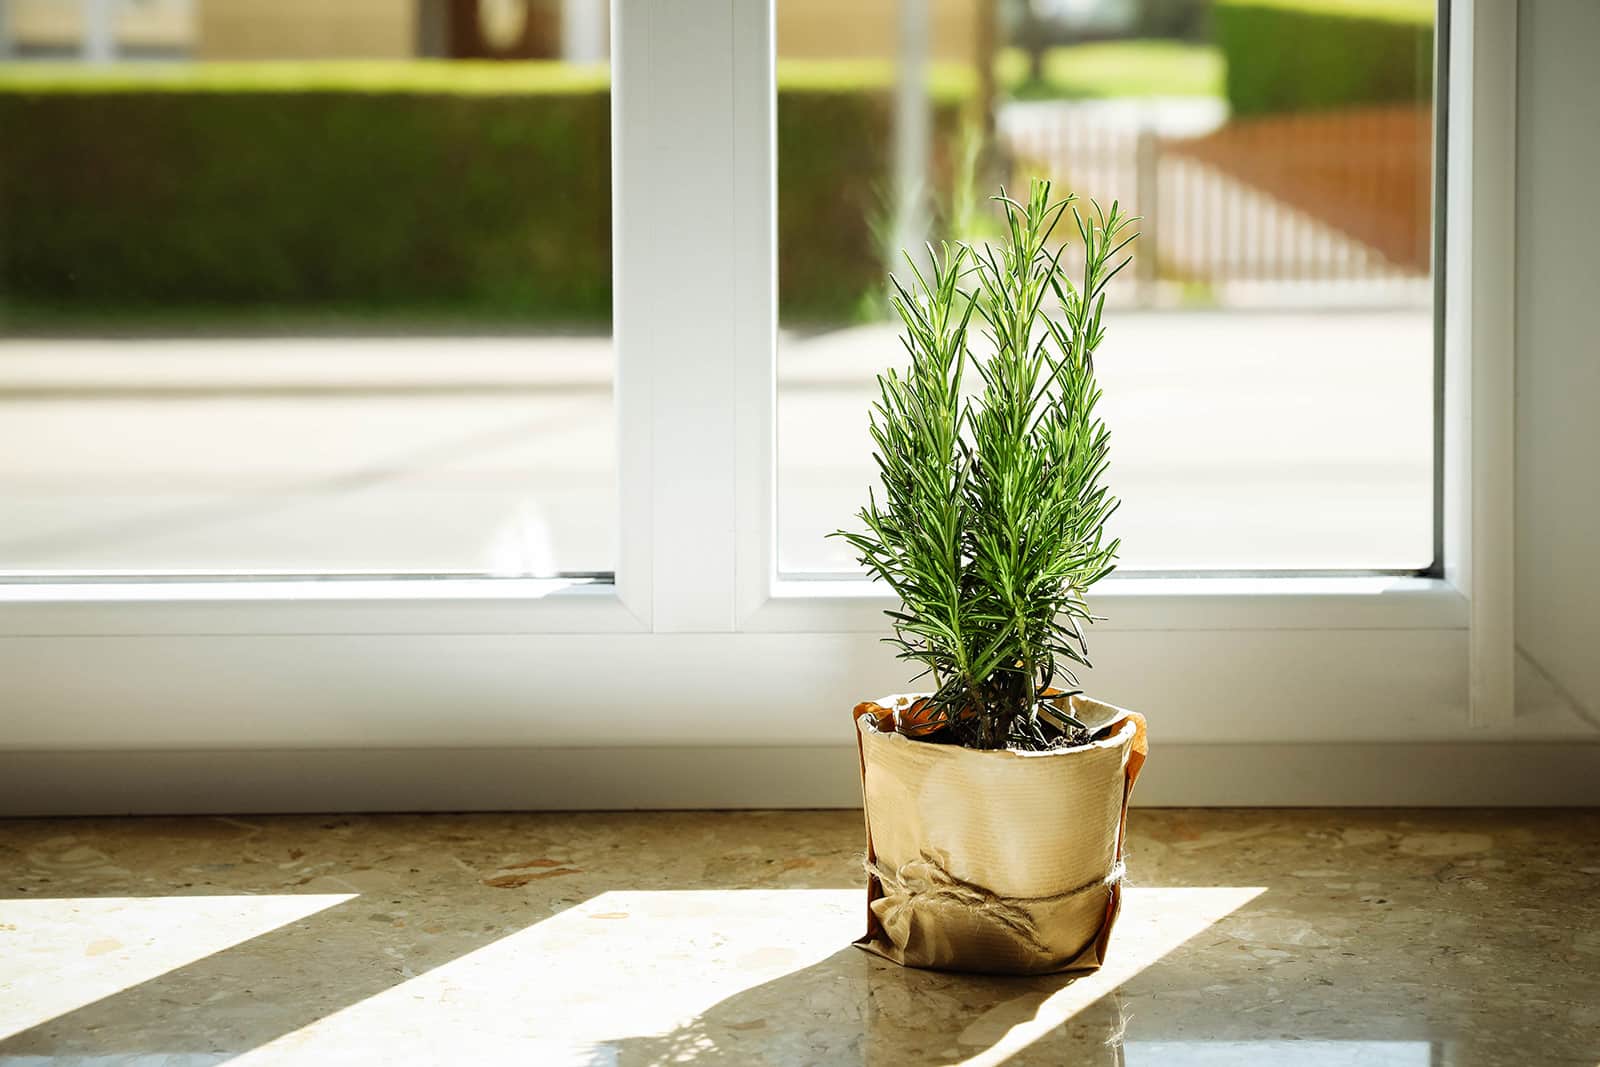 Rosemary shrub in a paper-wrapped pot in front of a window